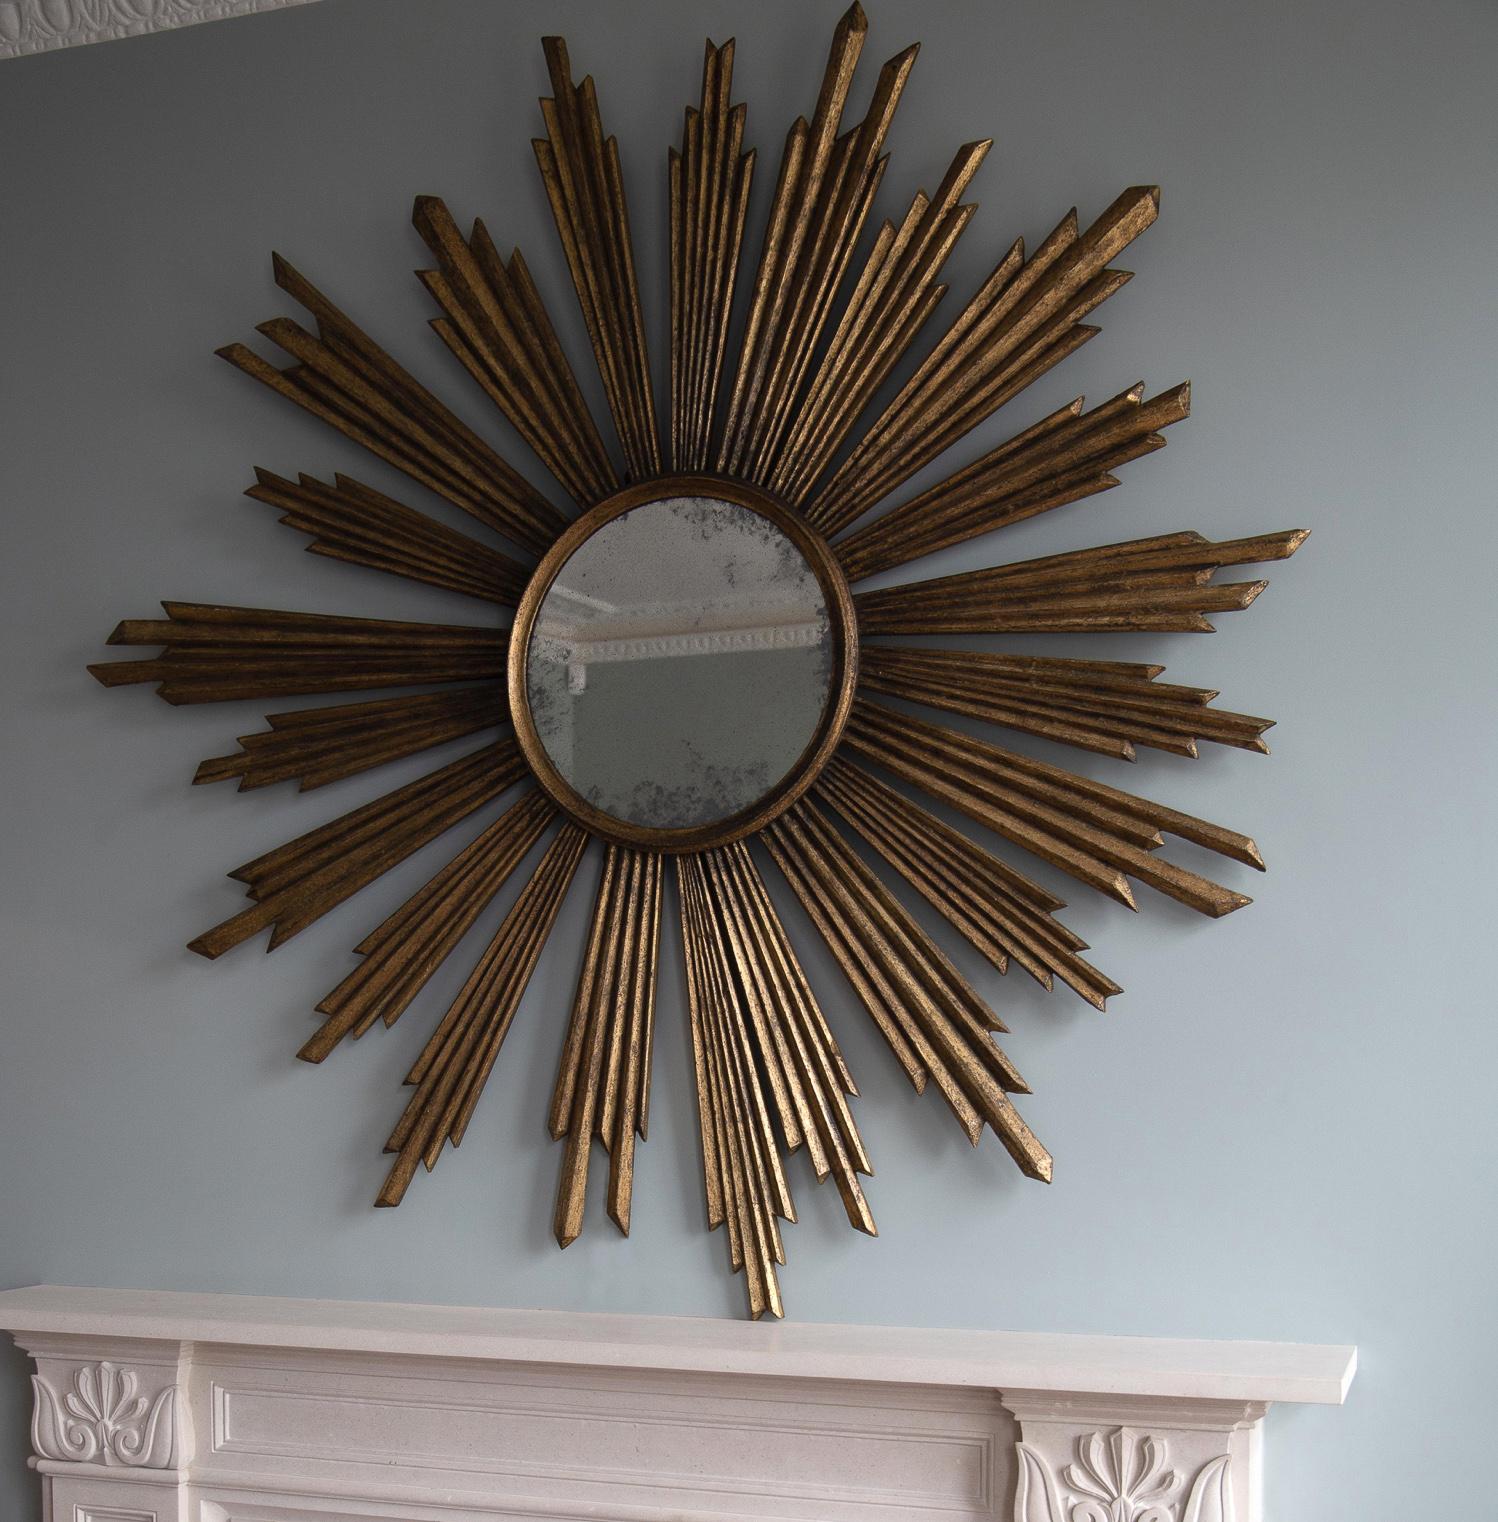 Grand proportions and exceptional patina.
Exceptional oil gilding designed to look aged on hand carved wooden frame with antiqued centre mirror glass.
A decorative statement piece with a real sense of scale made by finest British